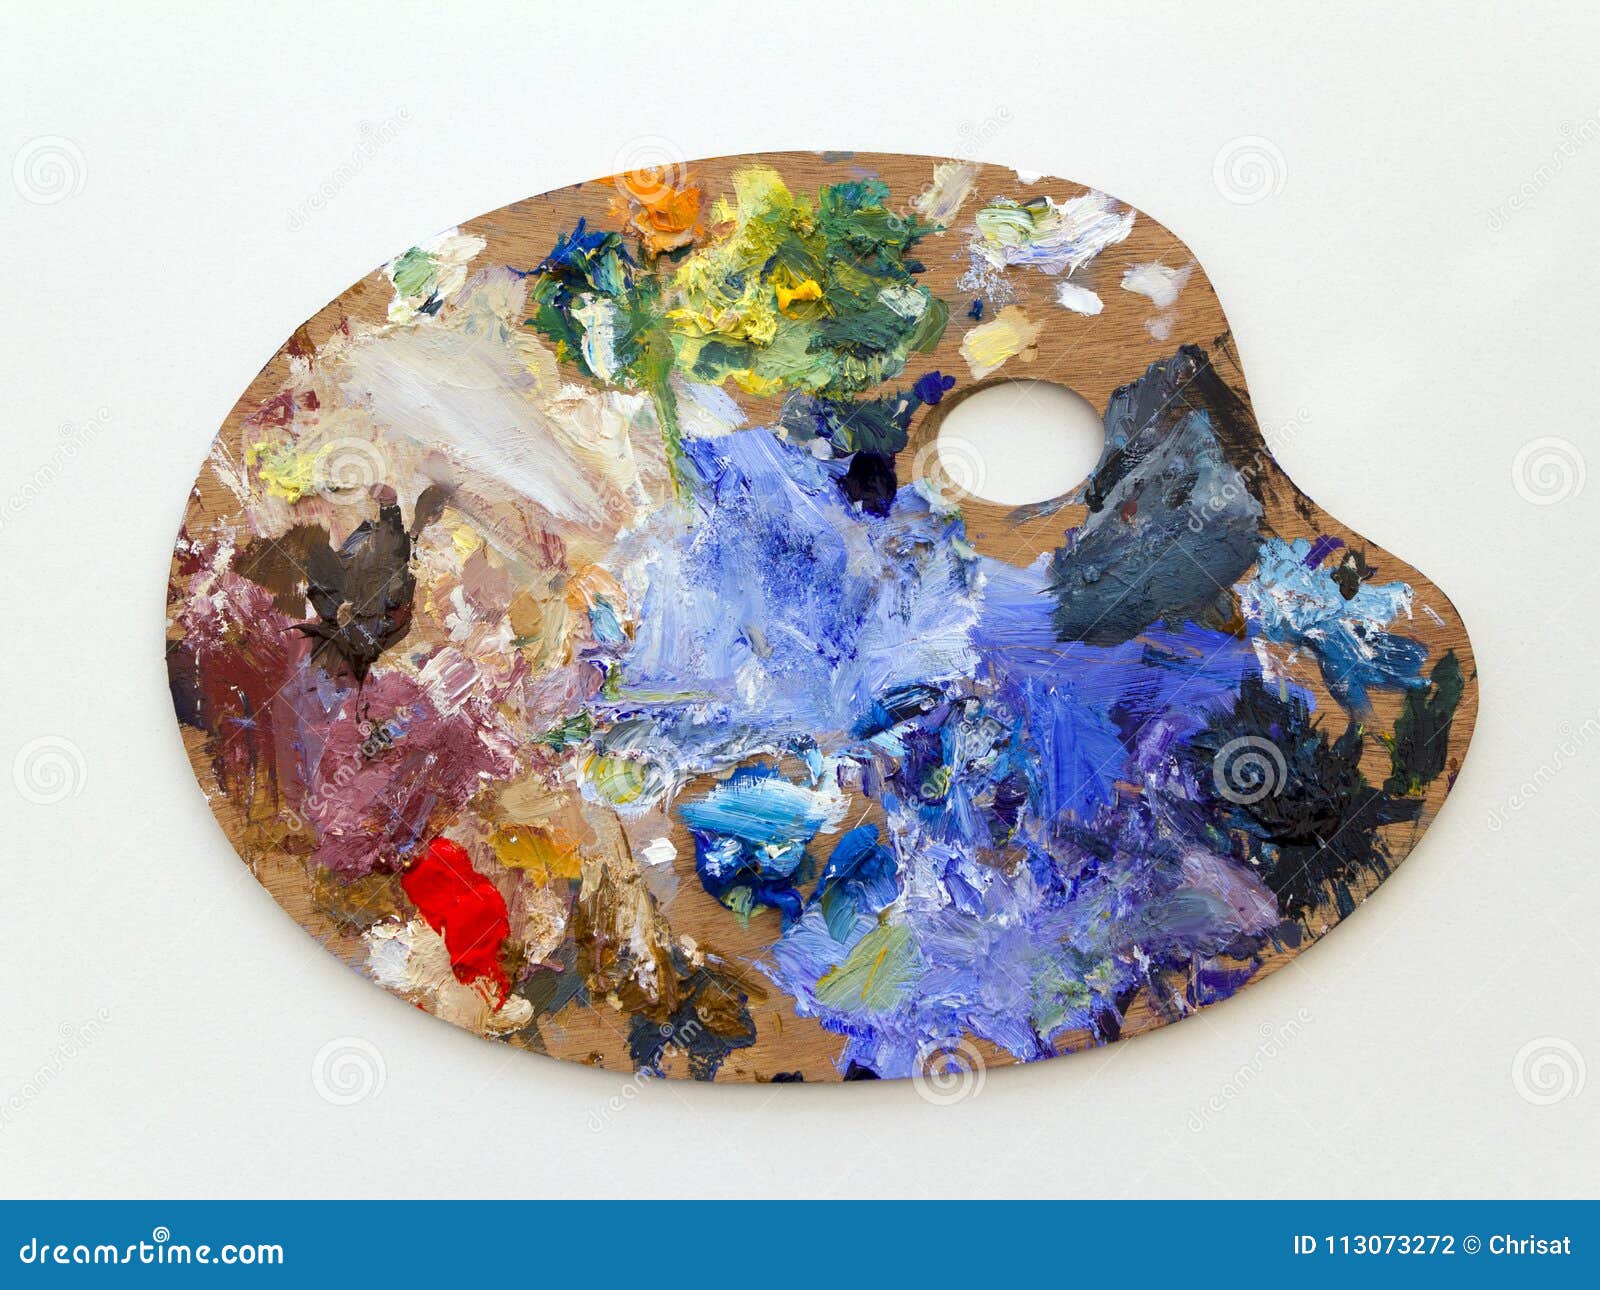 Artists Oil Painting Palette by Chrisat